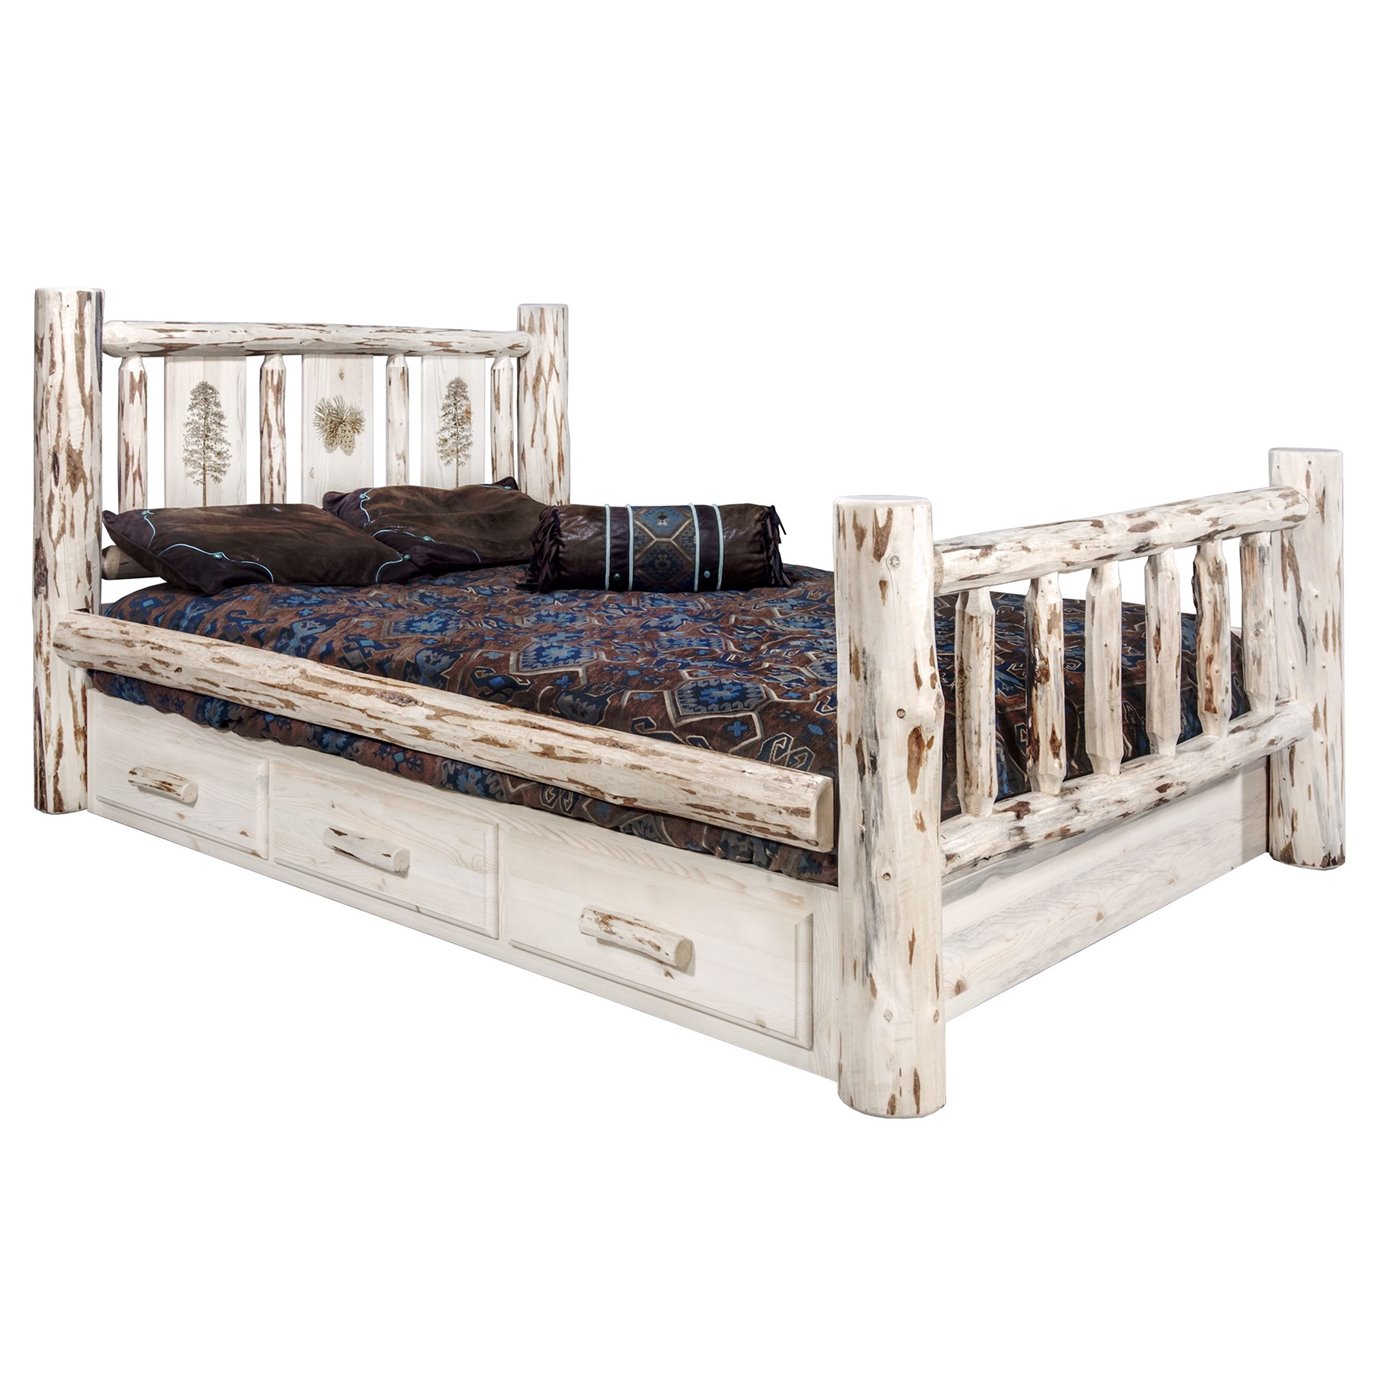 Montana King Storage Bed w/ Laser Engrave Pine Design - Clear Lacquer Finish